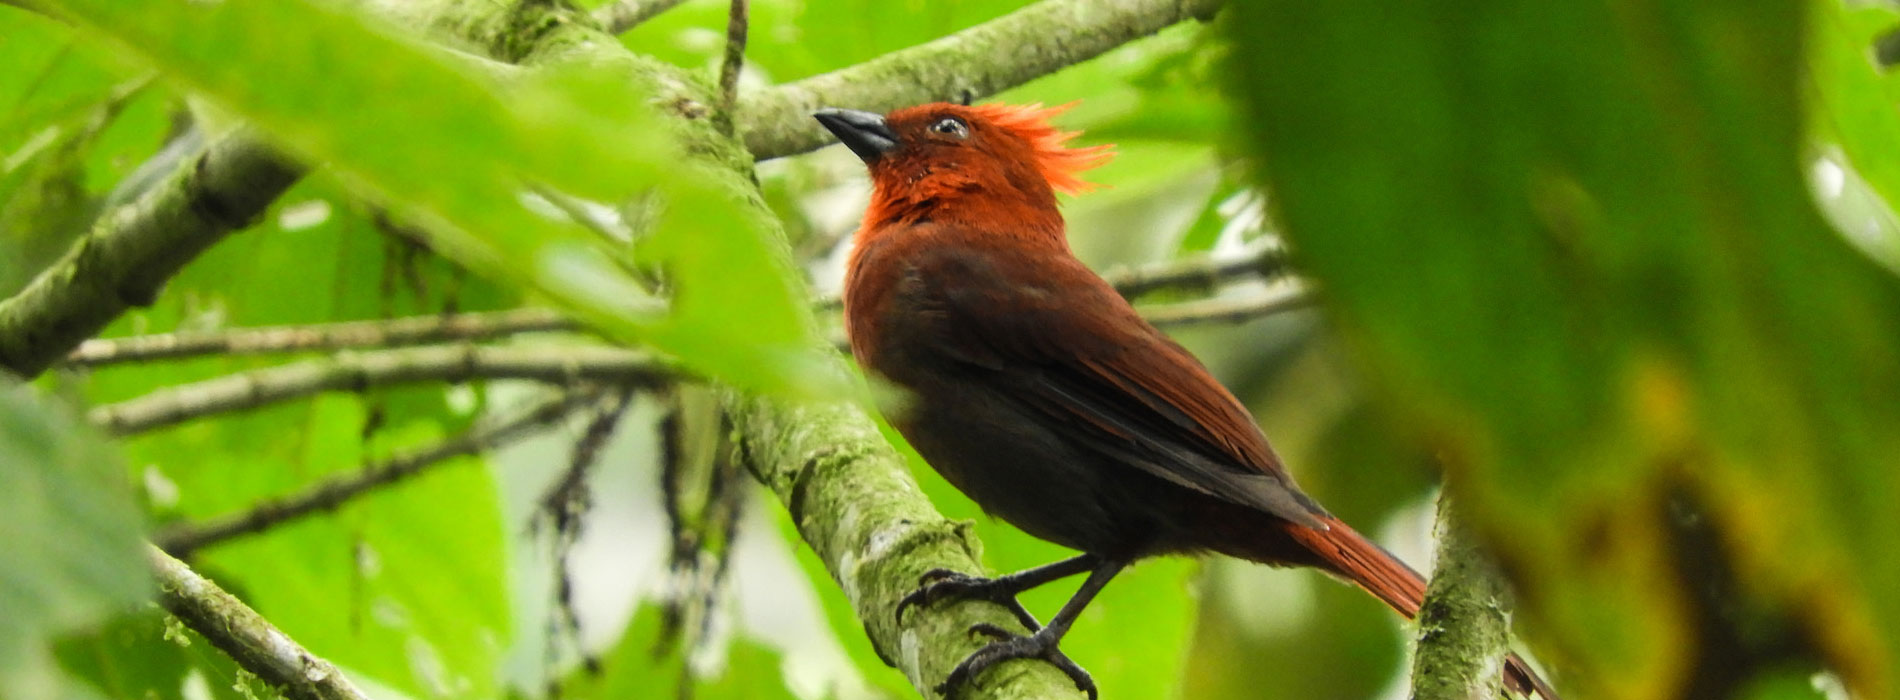 Each year a new bird species is discovered in Colombia. 